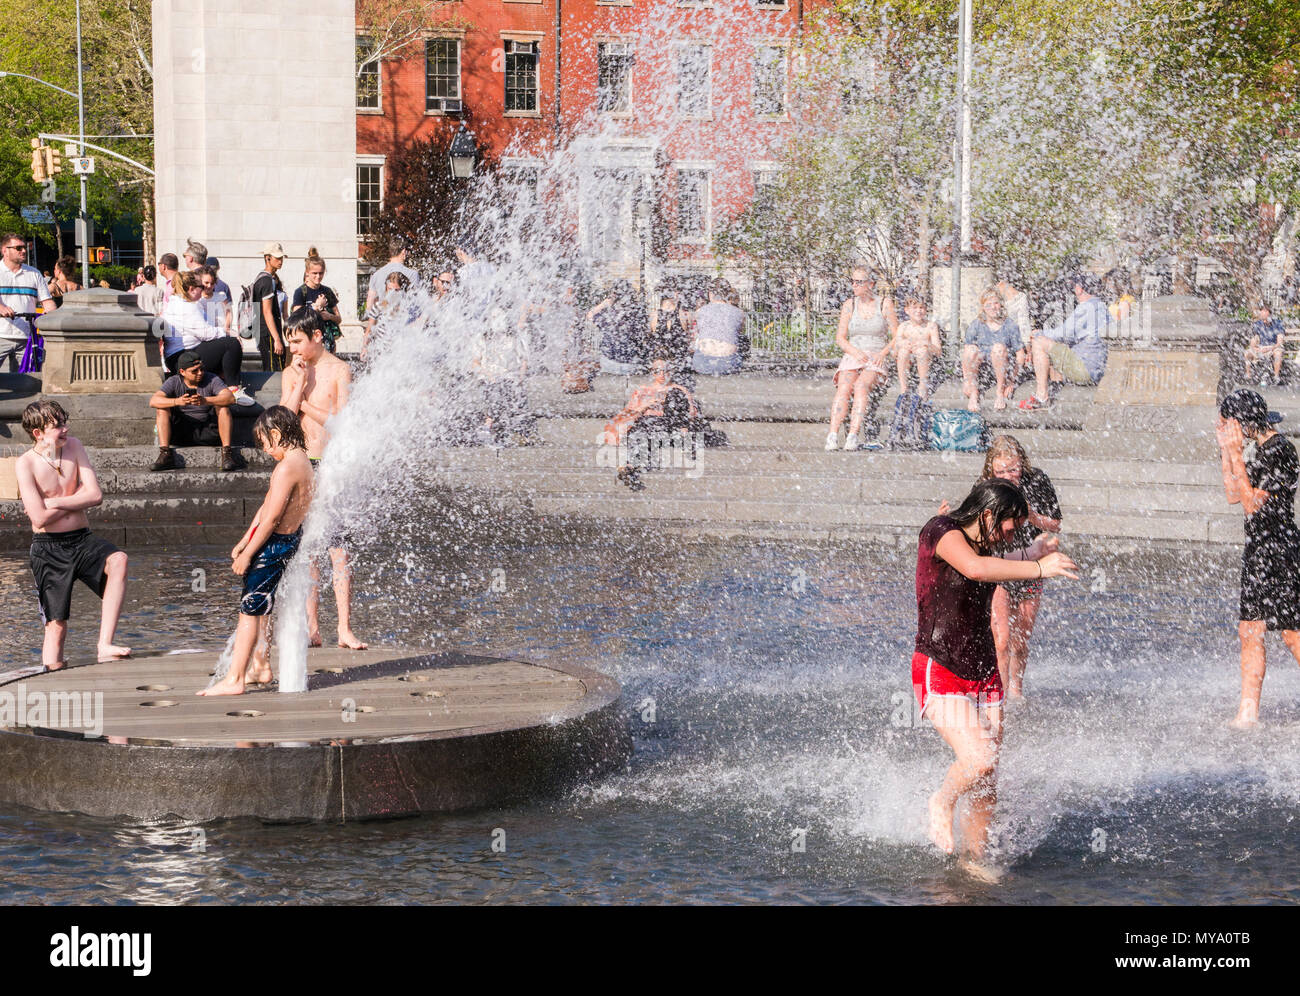 Boys and girls playing, and cooling down in fountain, Washington Square, New York City, USA Stock Photo